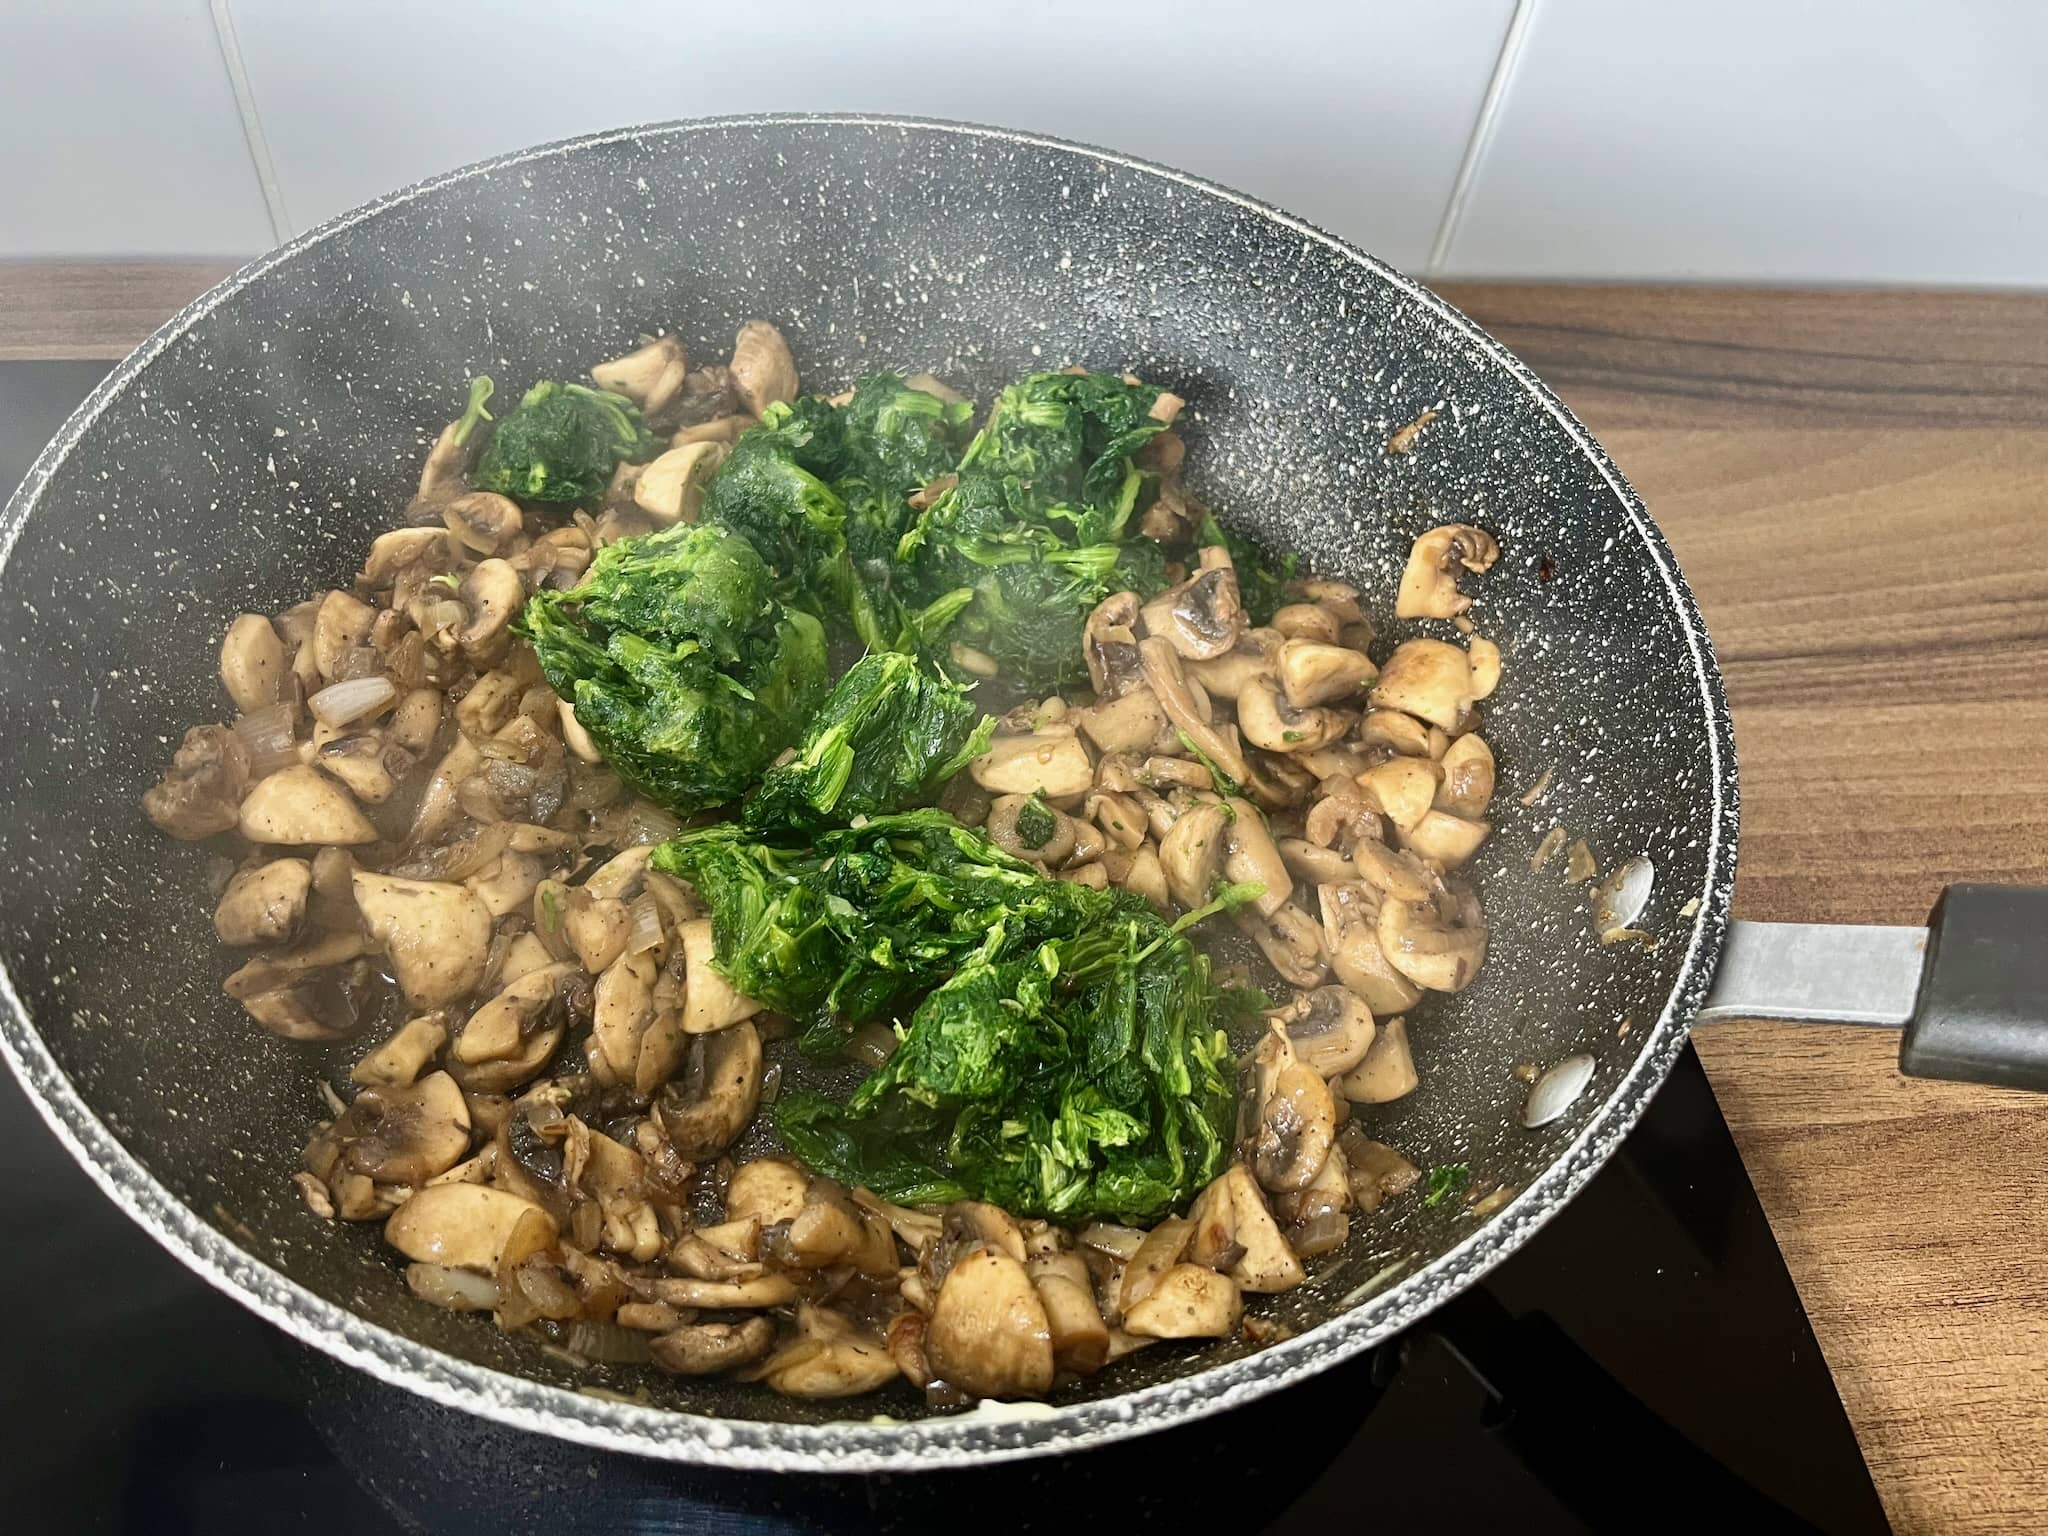 Mushrooms sizzling in a pan, topped with spinach